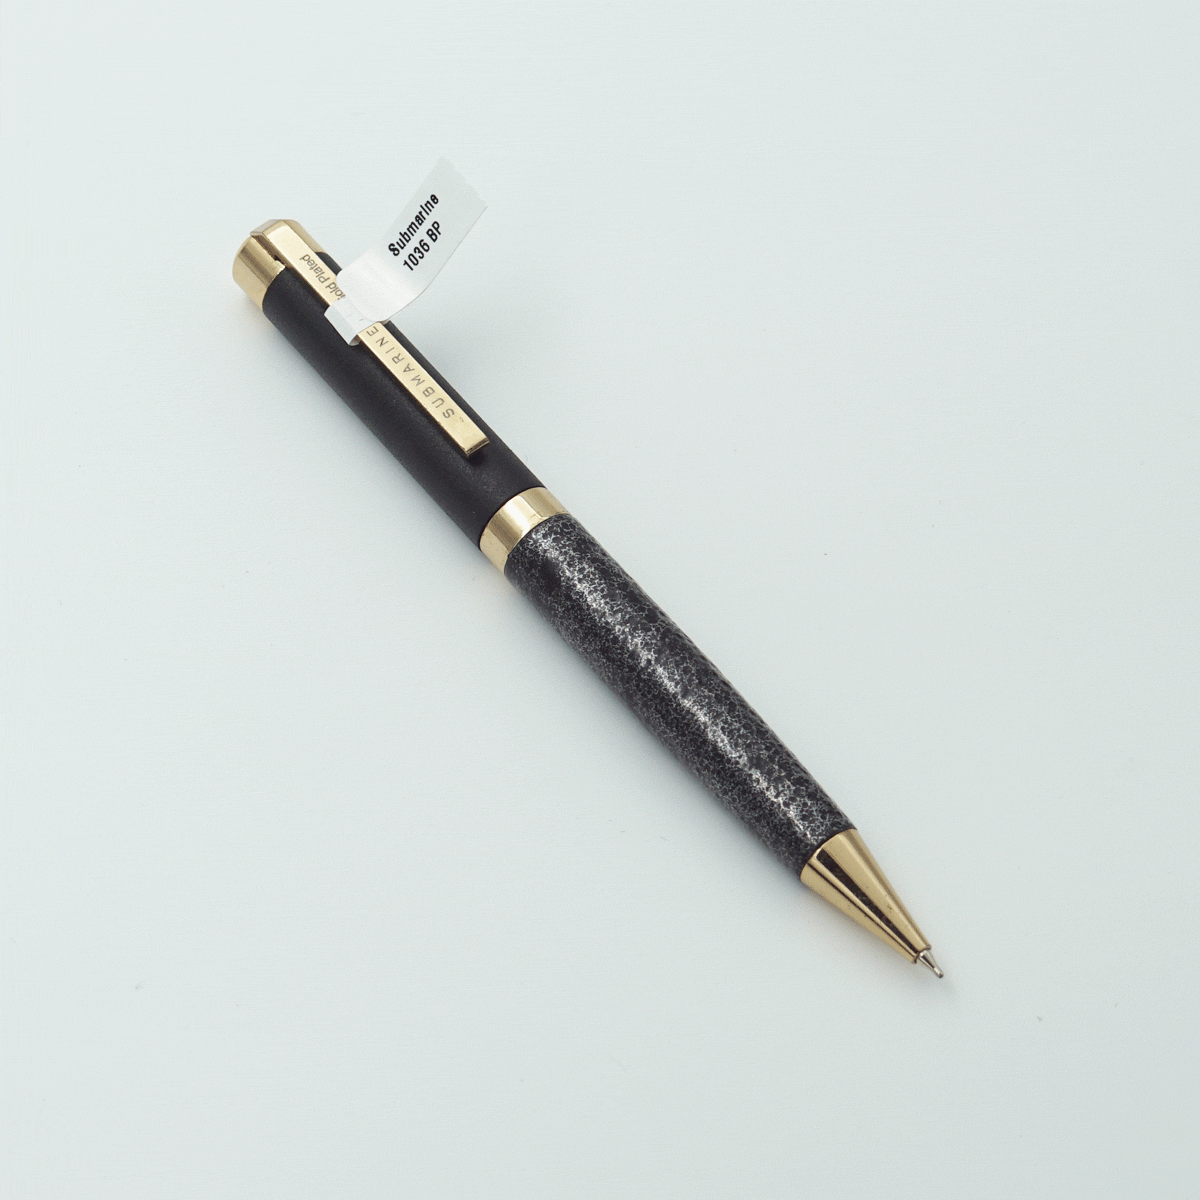 Submarine 1036 Antique Designed Body With Black Cap Gold Coated  Clip Fine Tip Roll Ball Pen SKU 23661